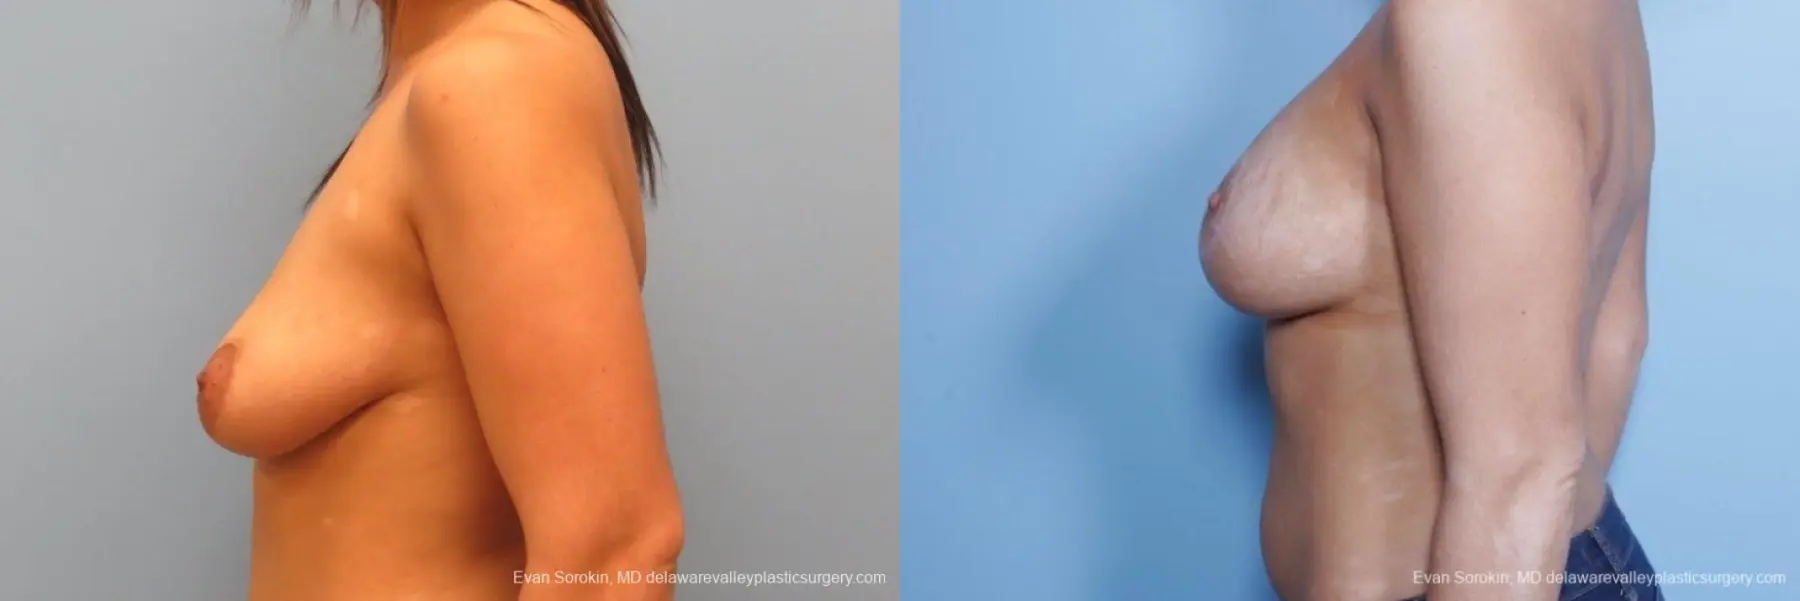 Philadelphia Breast Lift and Augmentation 8688 - Before and After 5